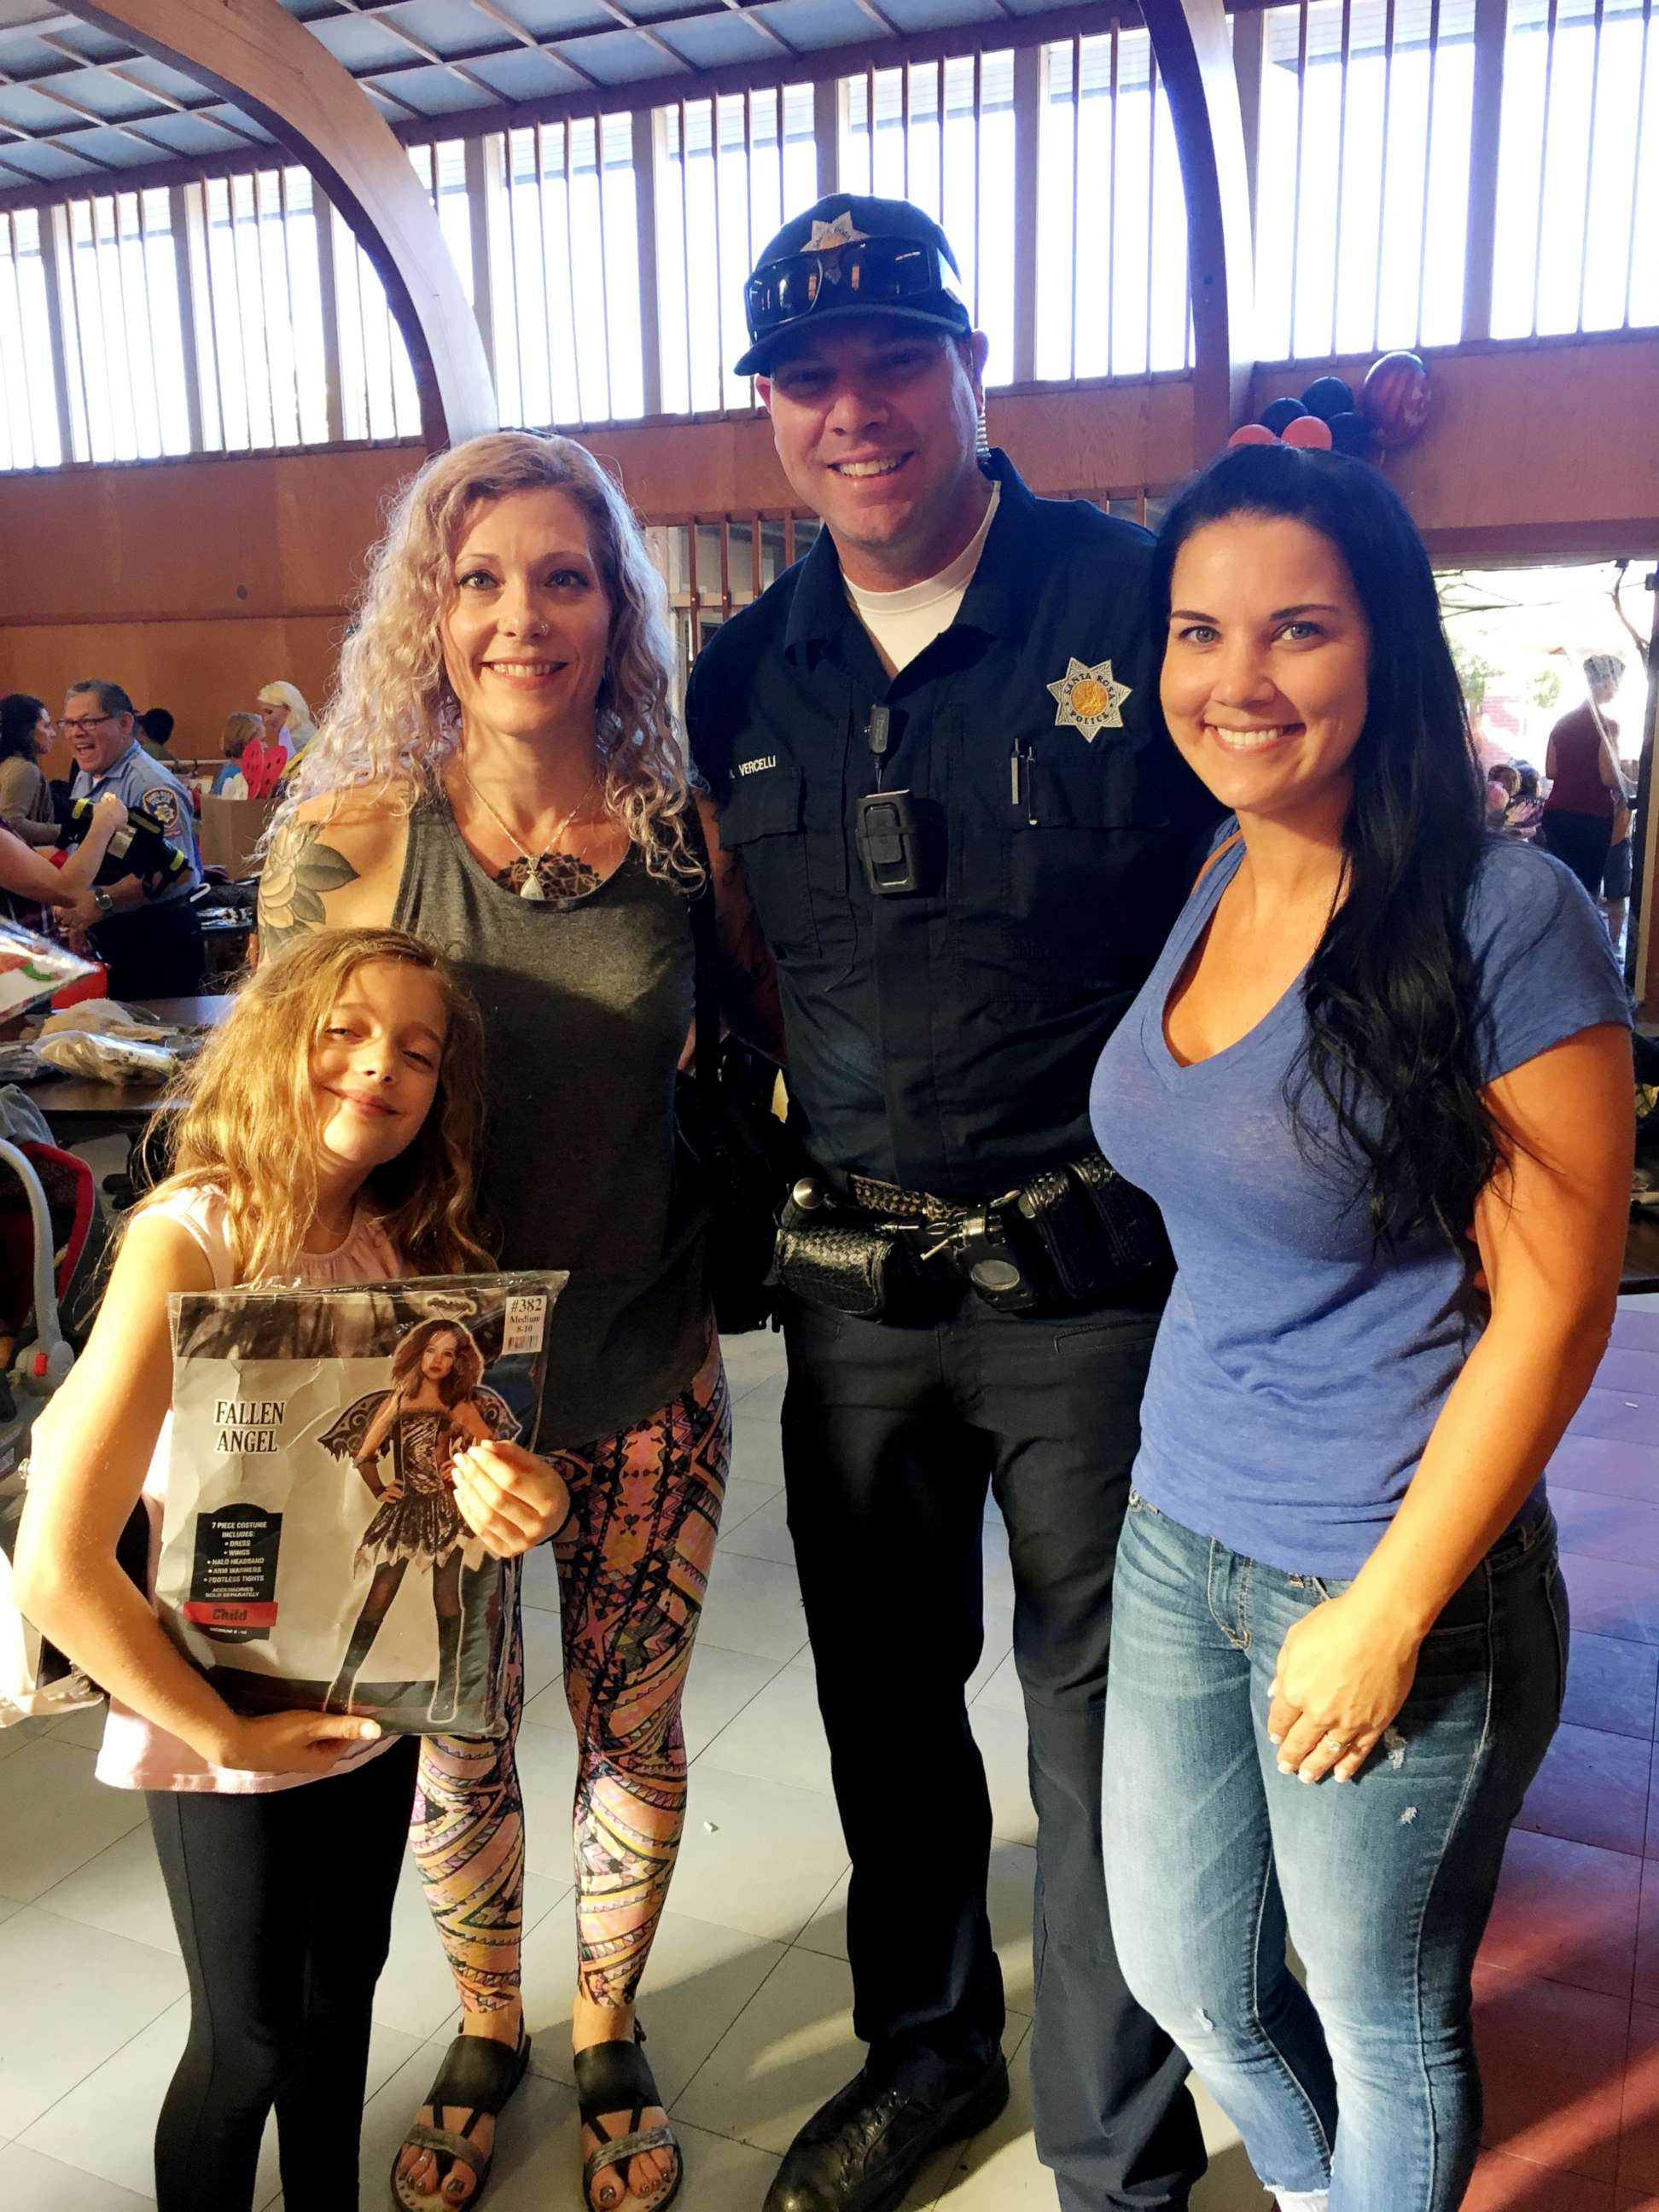 PHOTO: Sascha Humphrey, 9, holds her Halloween costume as she poses with her mother, Colleen Teitgen, left, Santa Rosa Polcie Officer Nick Vercelli and his fiance.